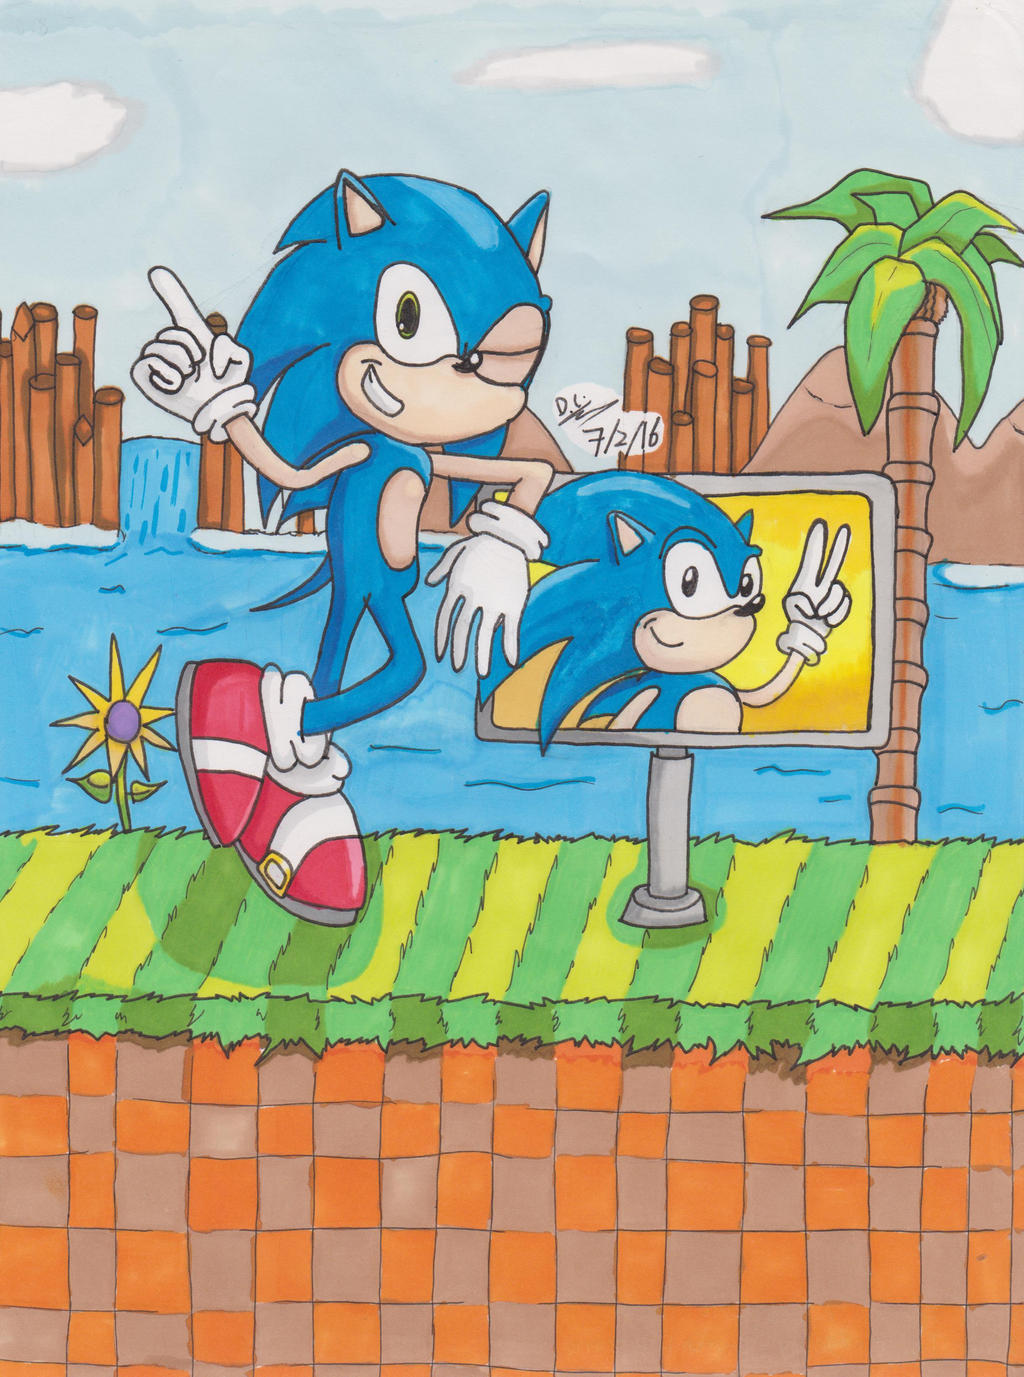 Sonic and Tails running in Green Hill Zone by L-Dawg211 on DeviantArt